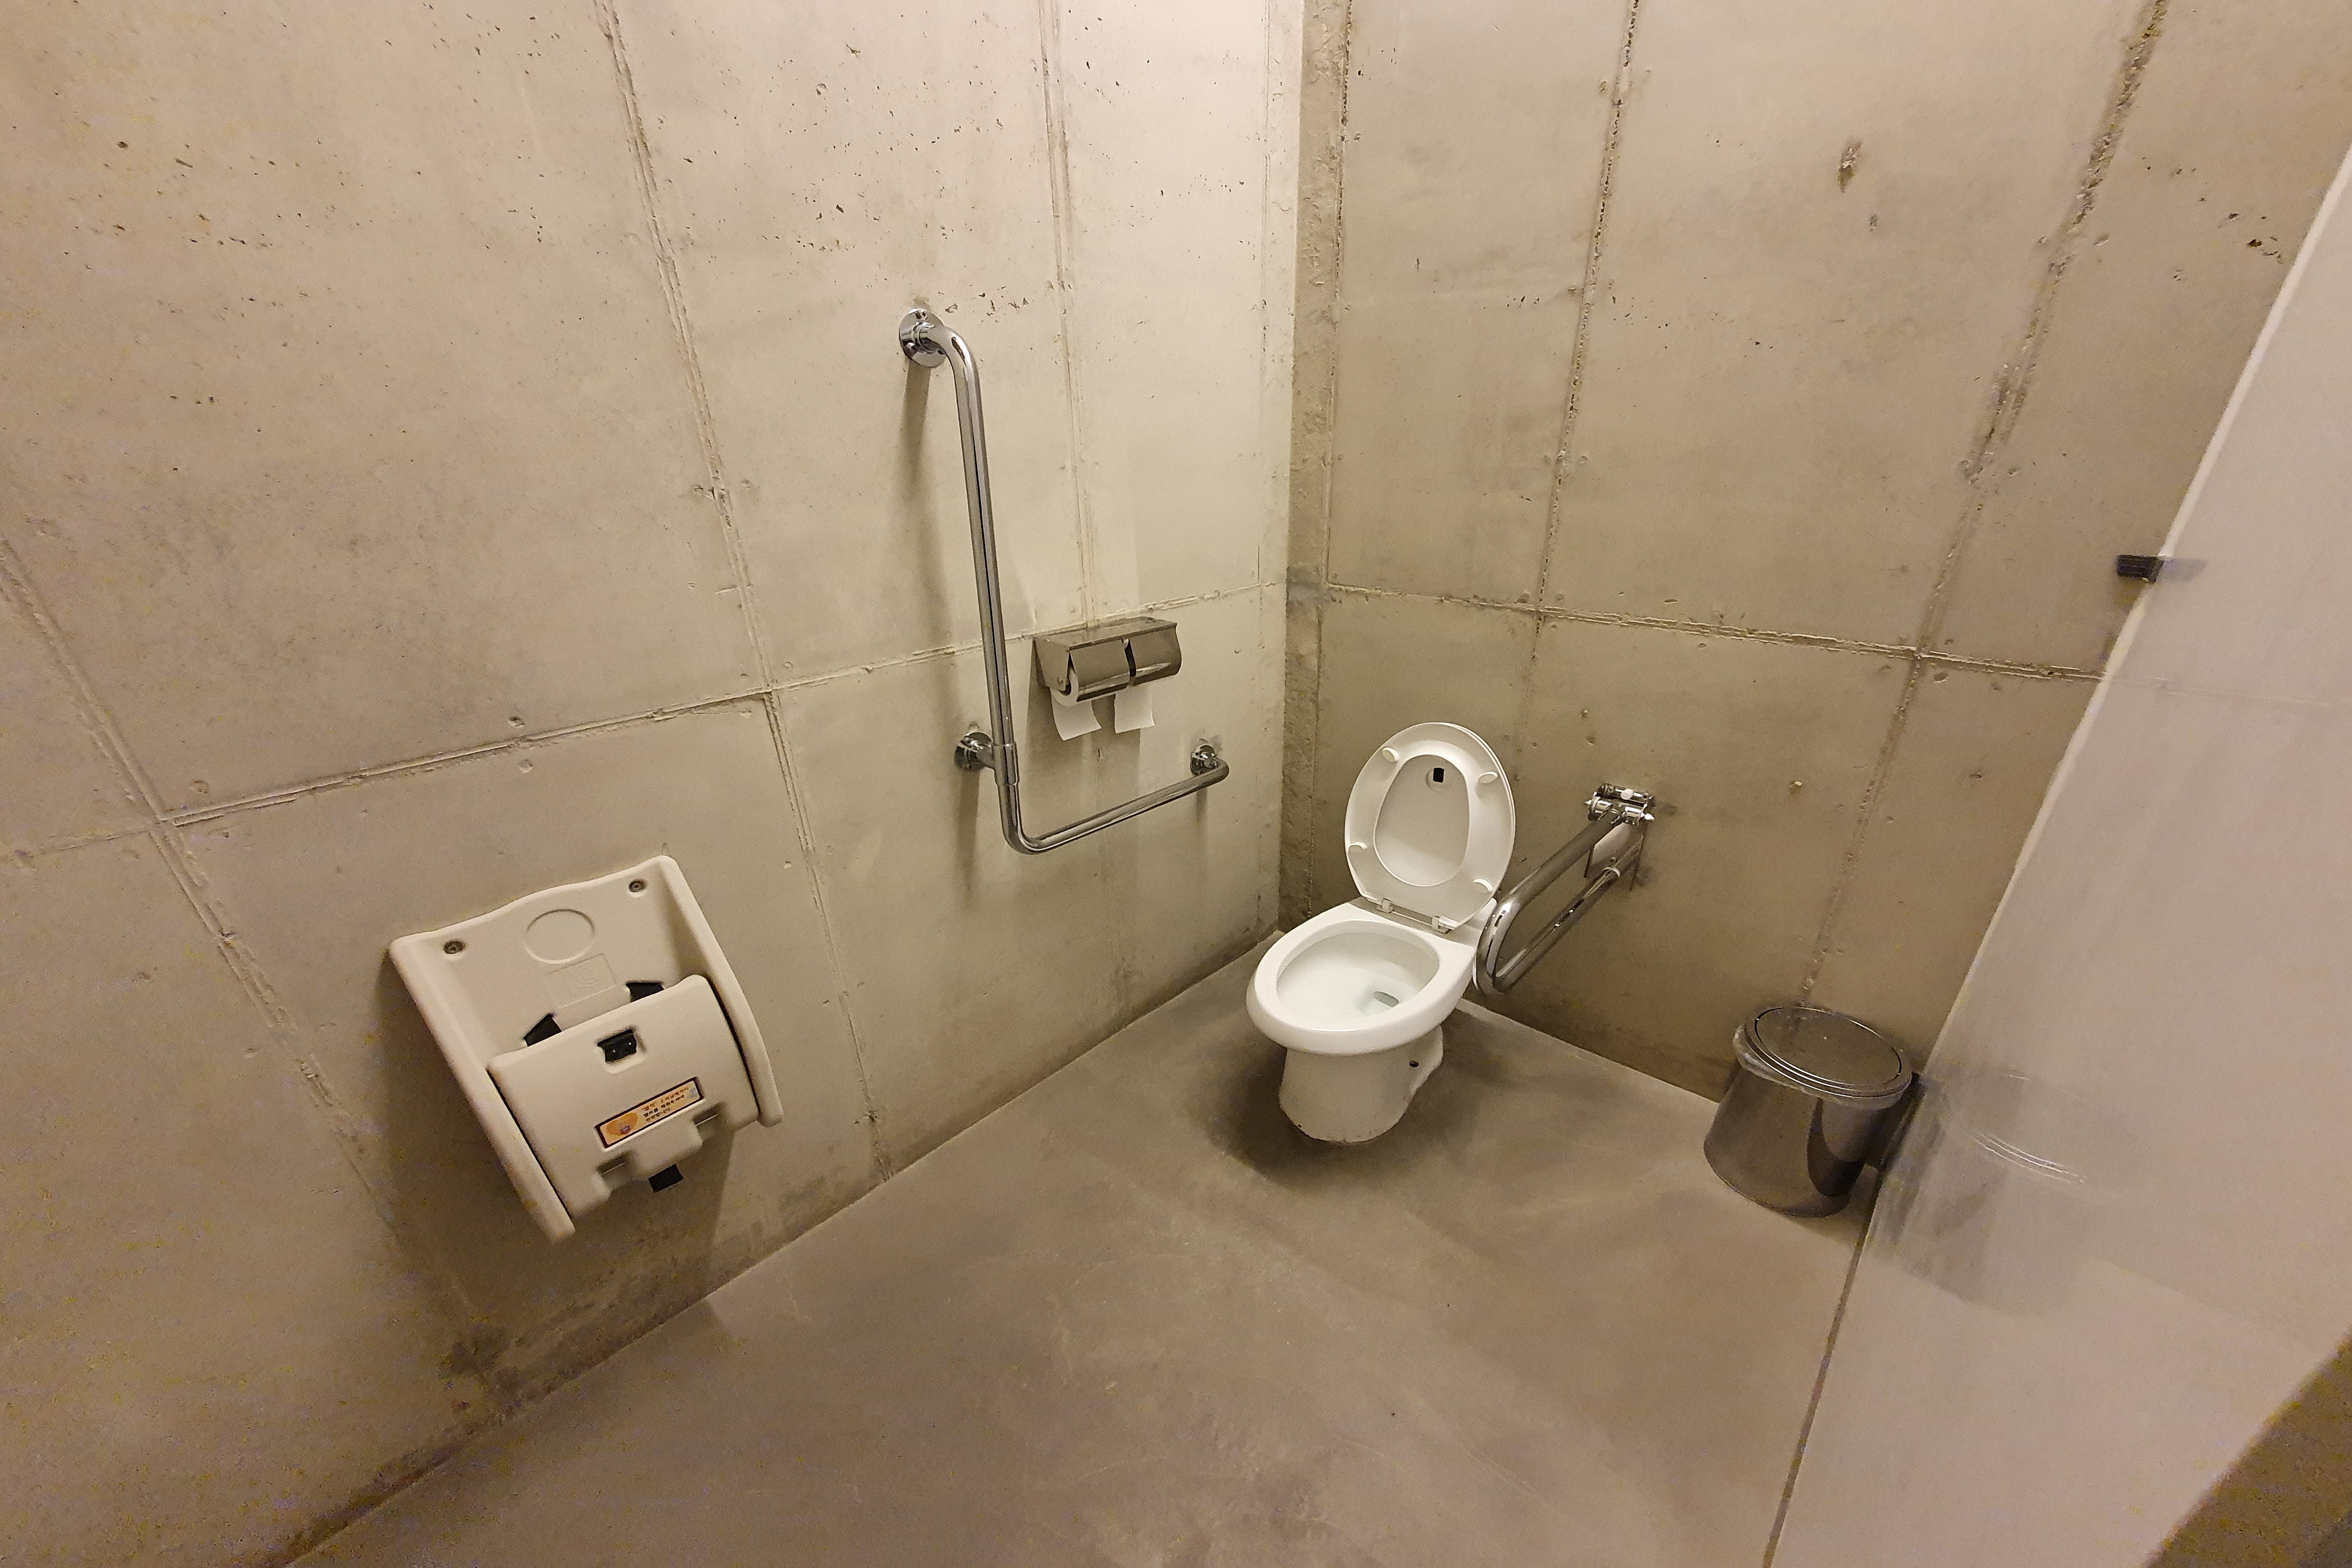 Accessible Restrooms0 : The accessible toilet stall with a baby holder and grab bars 